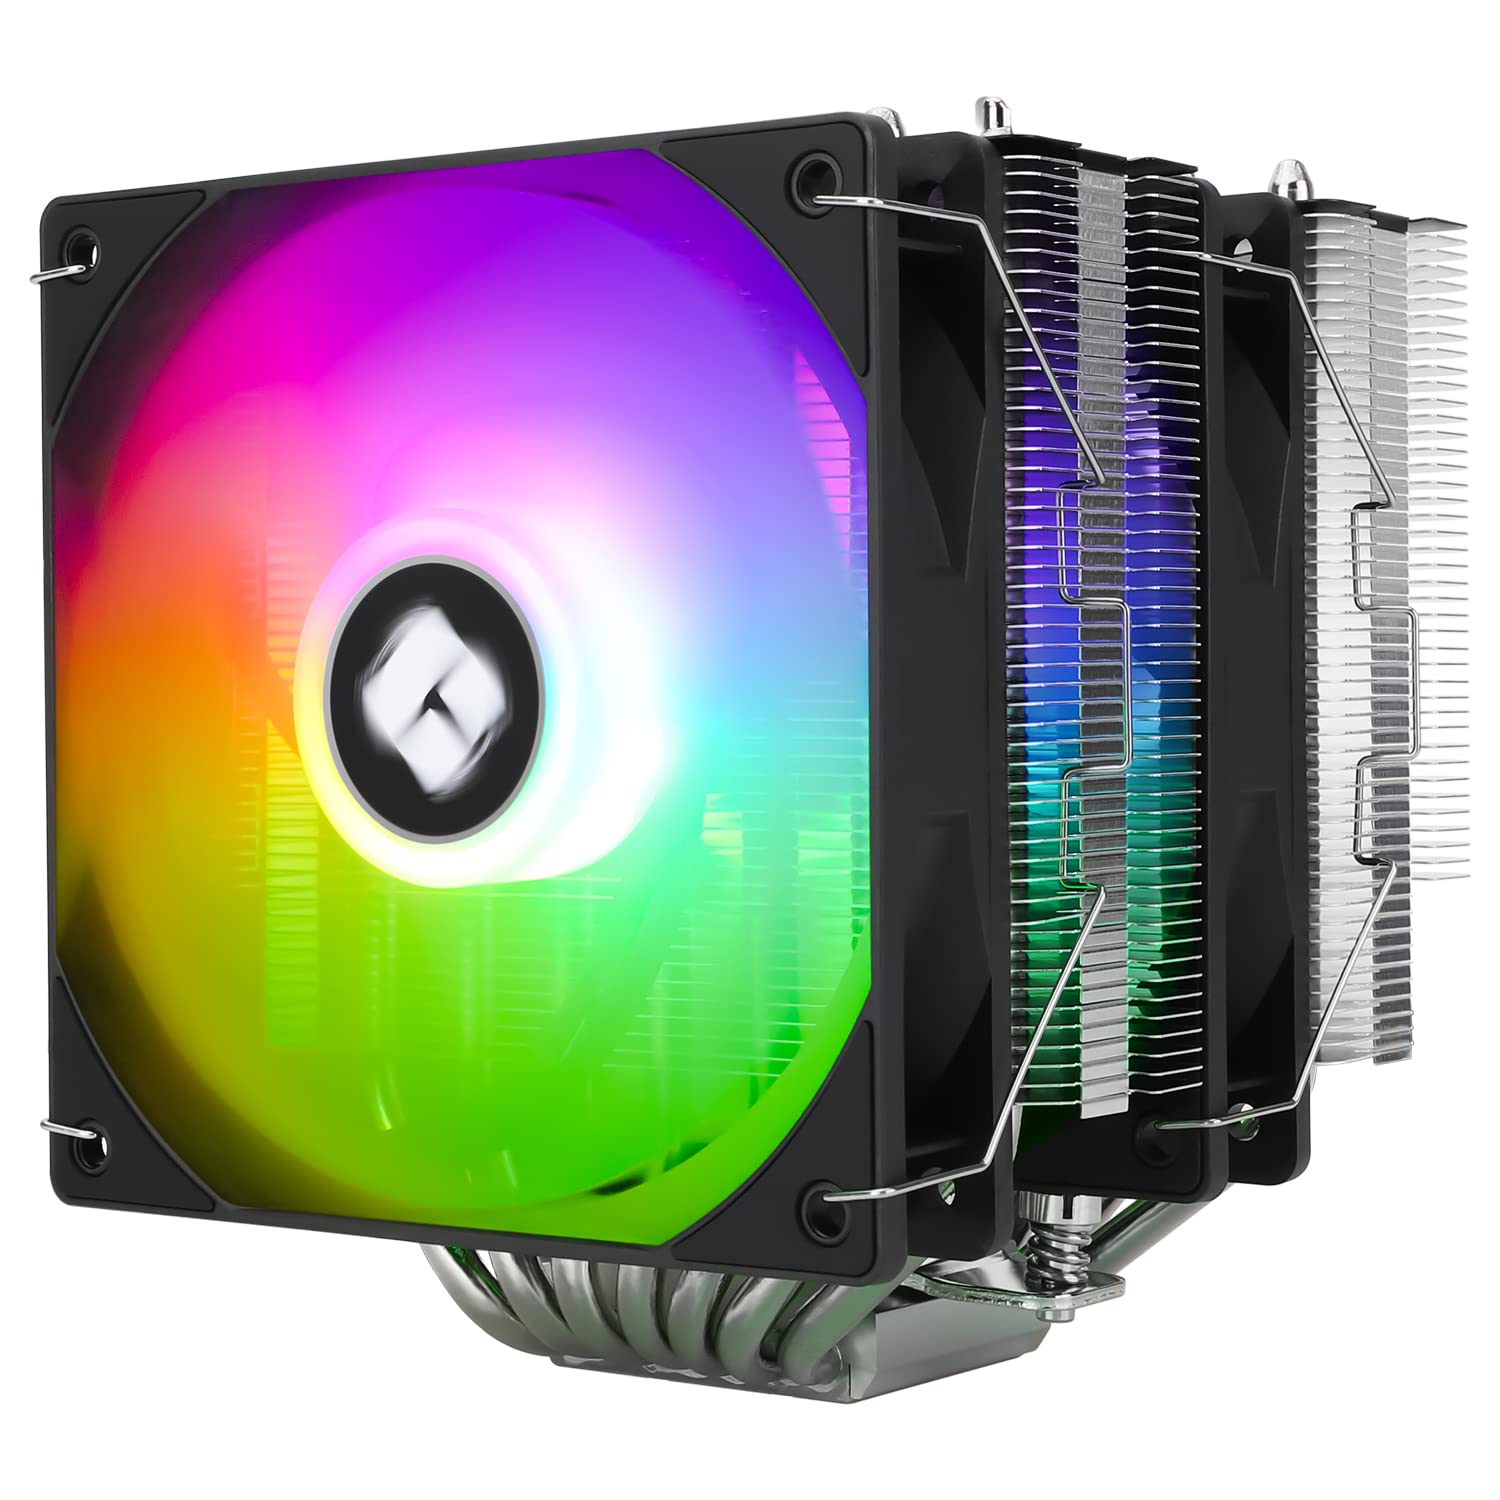 One of the best-value air coolers, the Thermalright Phantom Spirit